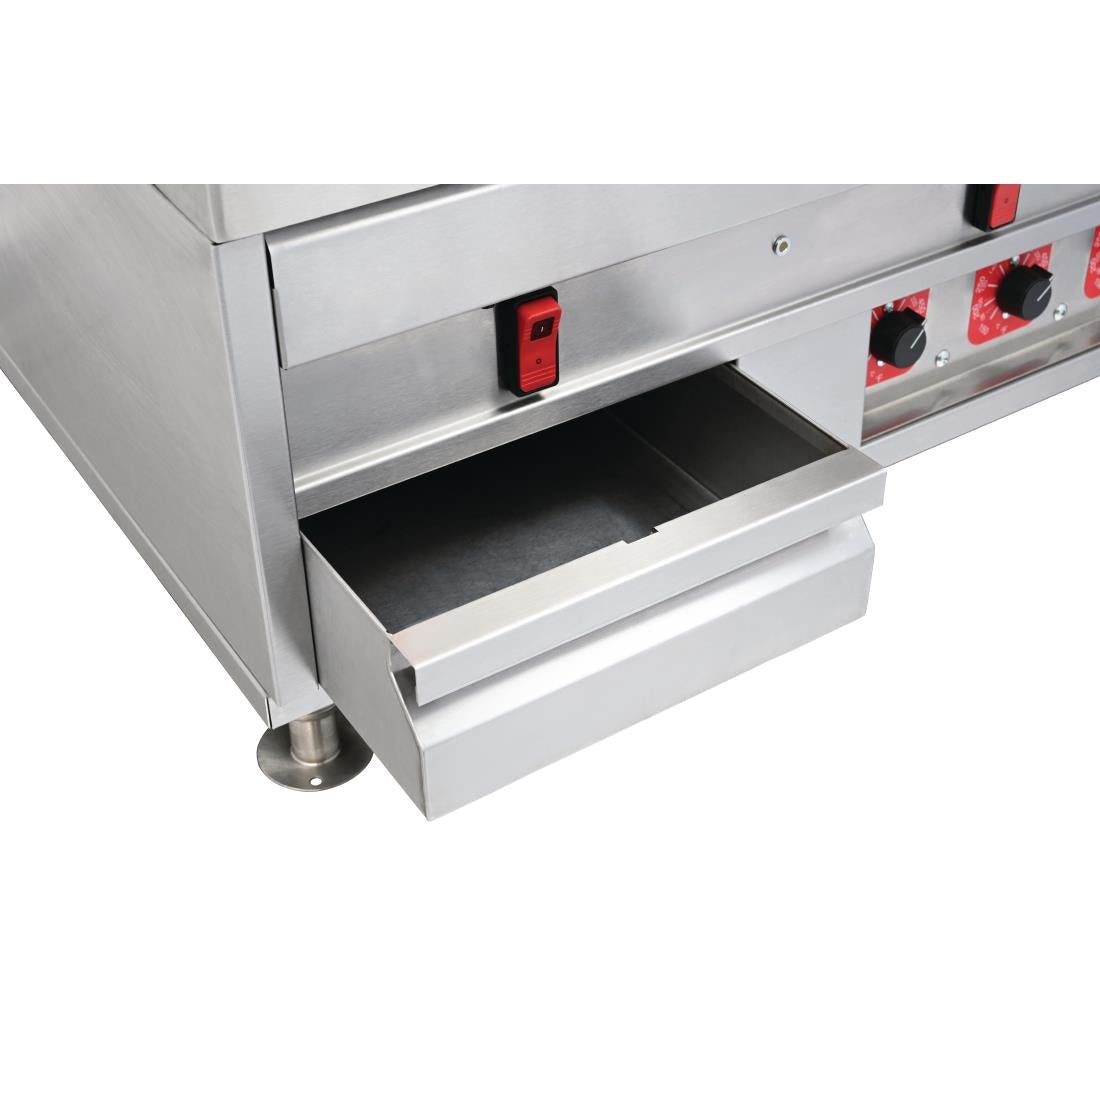 FP870 MagiKitch'n Heavy Duty Chrome Griddle MKG36 JD Catering Equipment Solutions Ltd